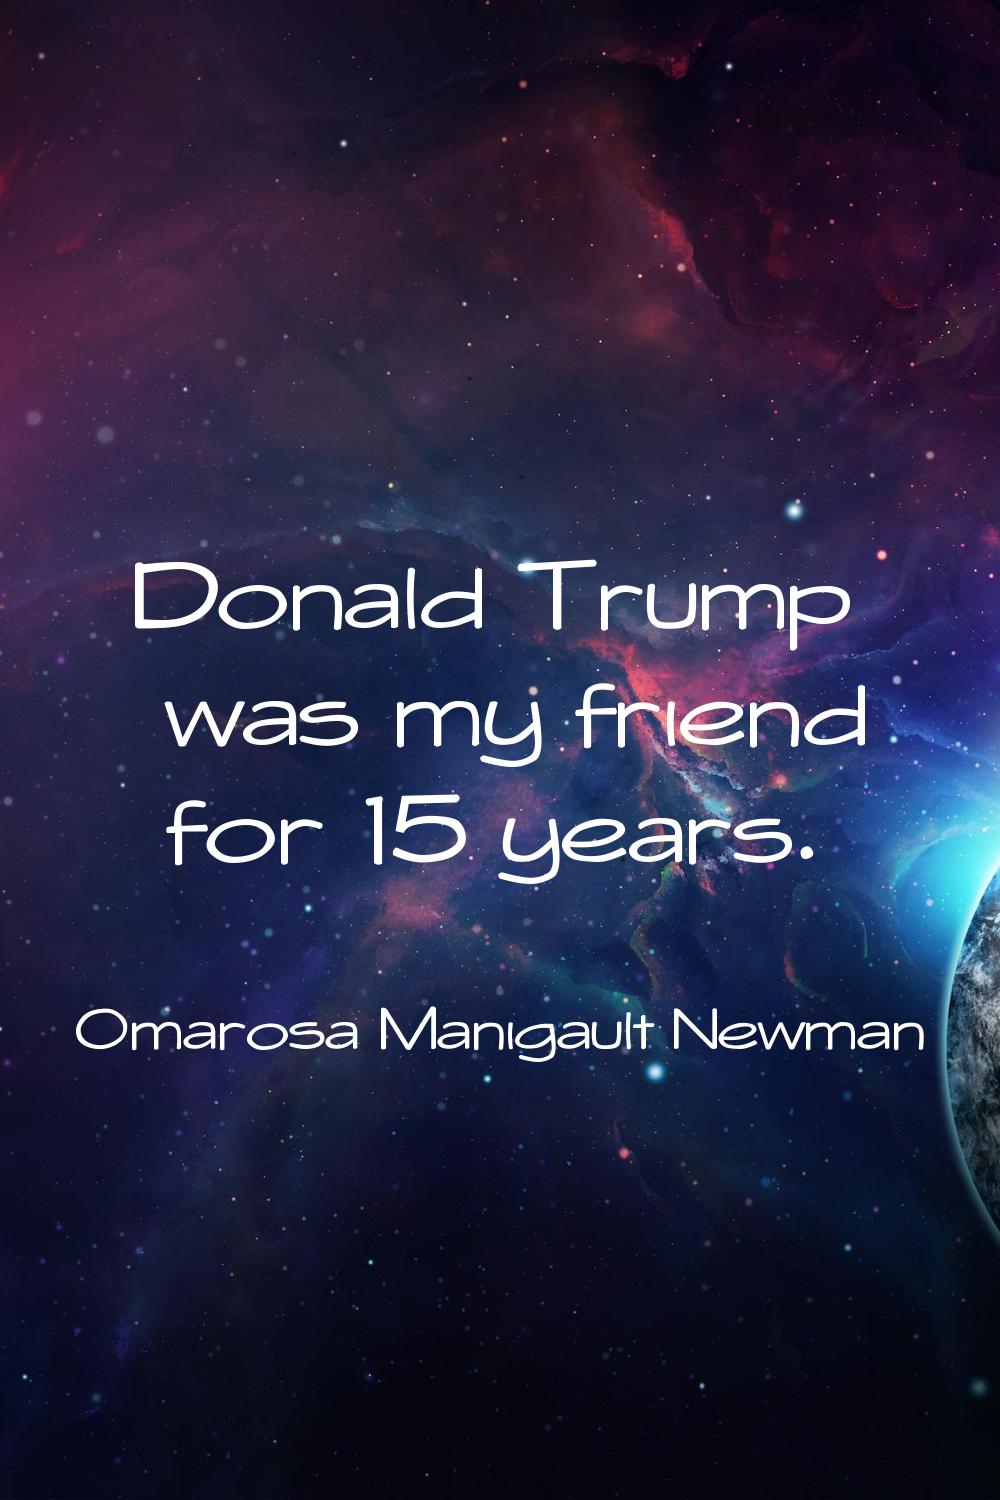 Donald Trump was my friend for 15 years.